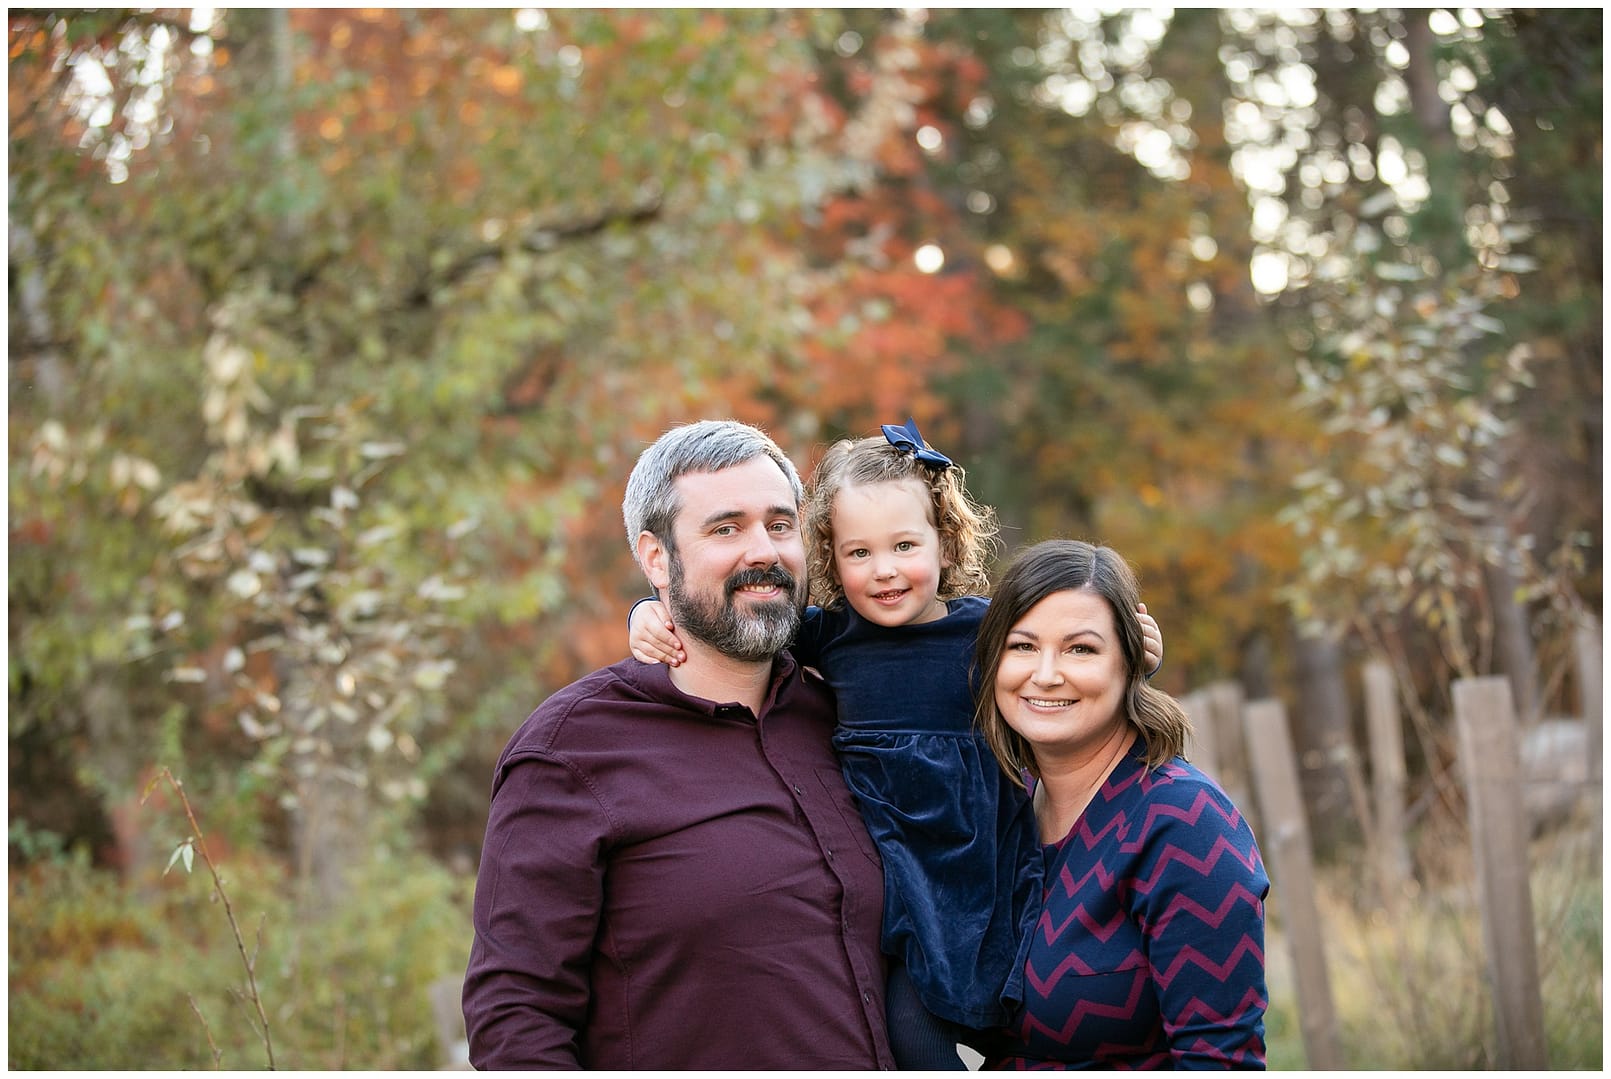 Mom, dad & daughter in Boise open space. Photo by Tiffany Hix Photography.